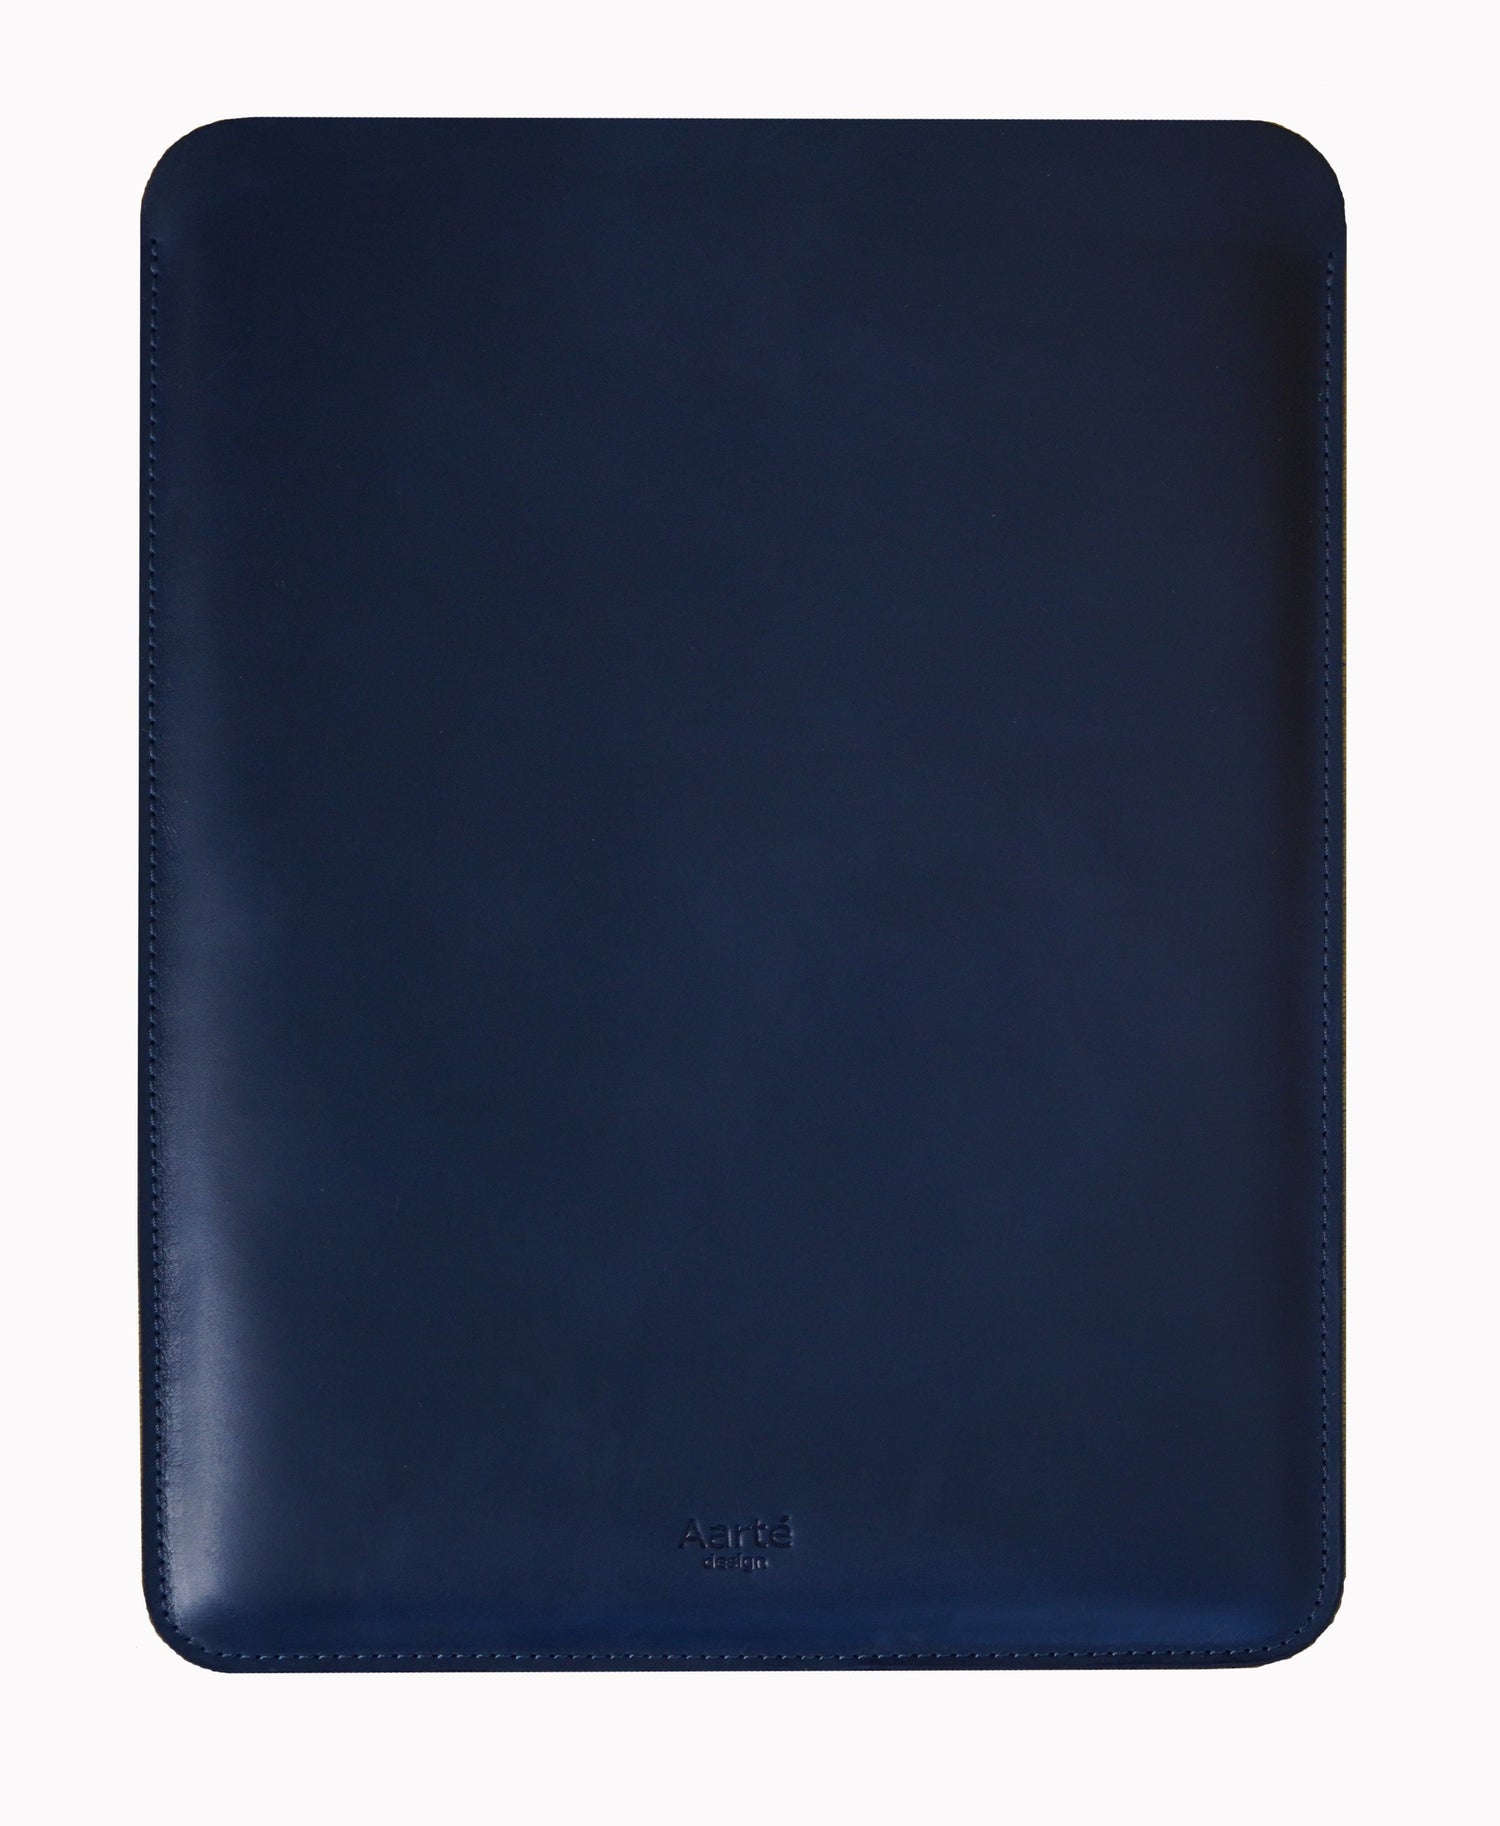 GENUINE APPLE LEATHER SLEEVE FOR MACBOOK PRO AIR 12 13 15 16 CASE BLACK  BLUE